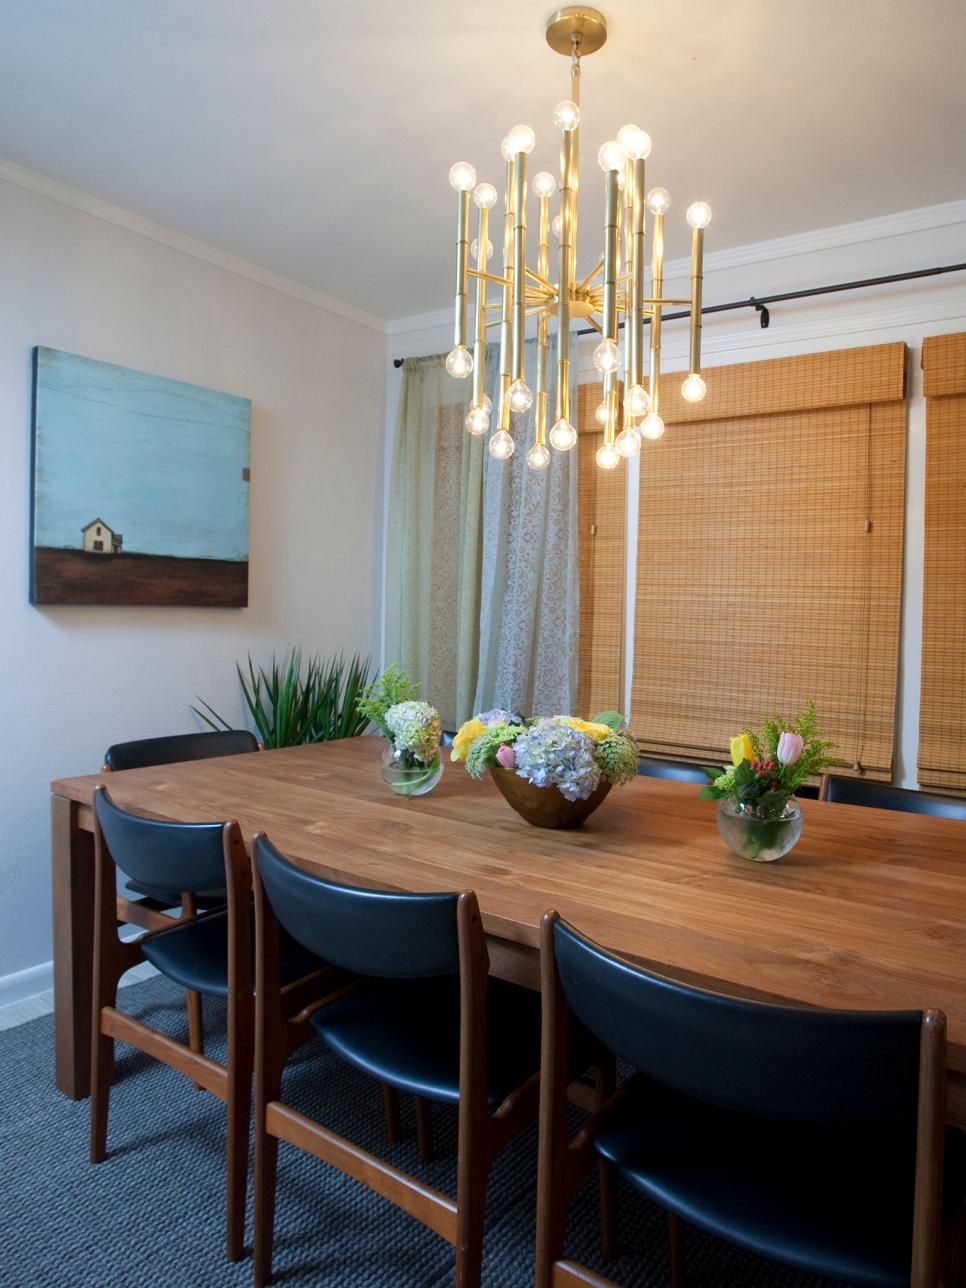 Wood table in dining room with midcentury modern chairs